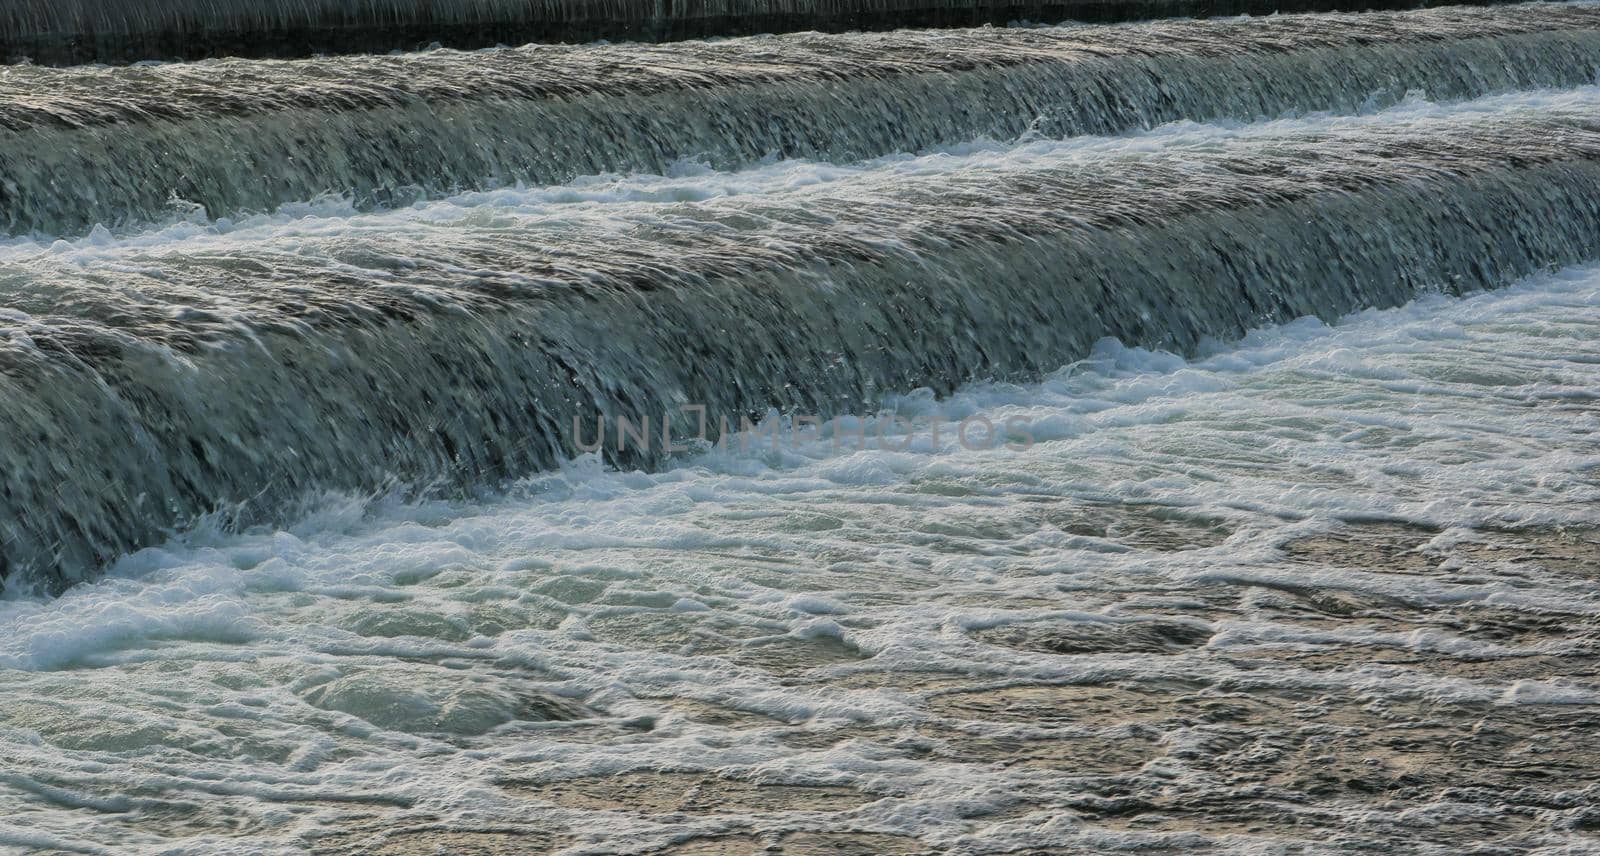 The water flows quickly through the rapid cascade of the river.